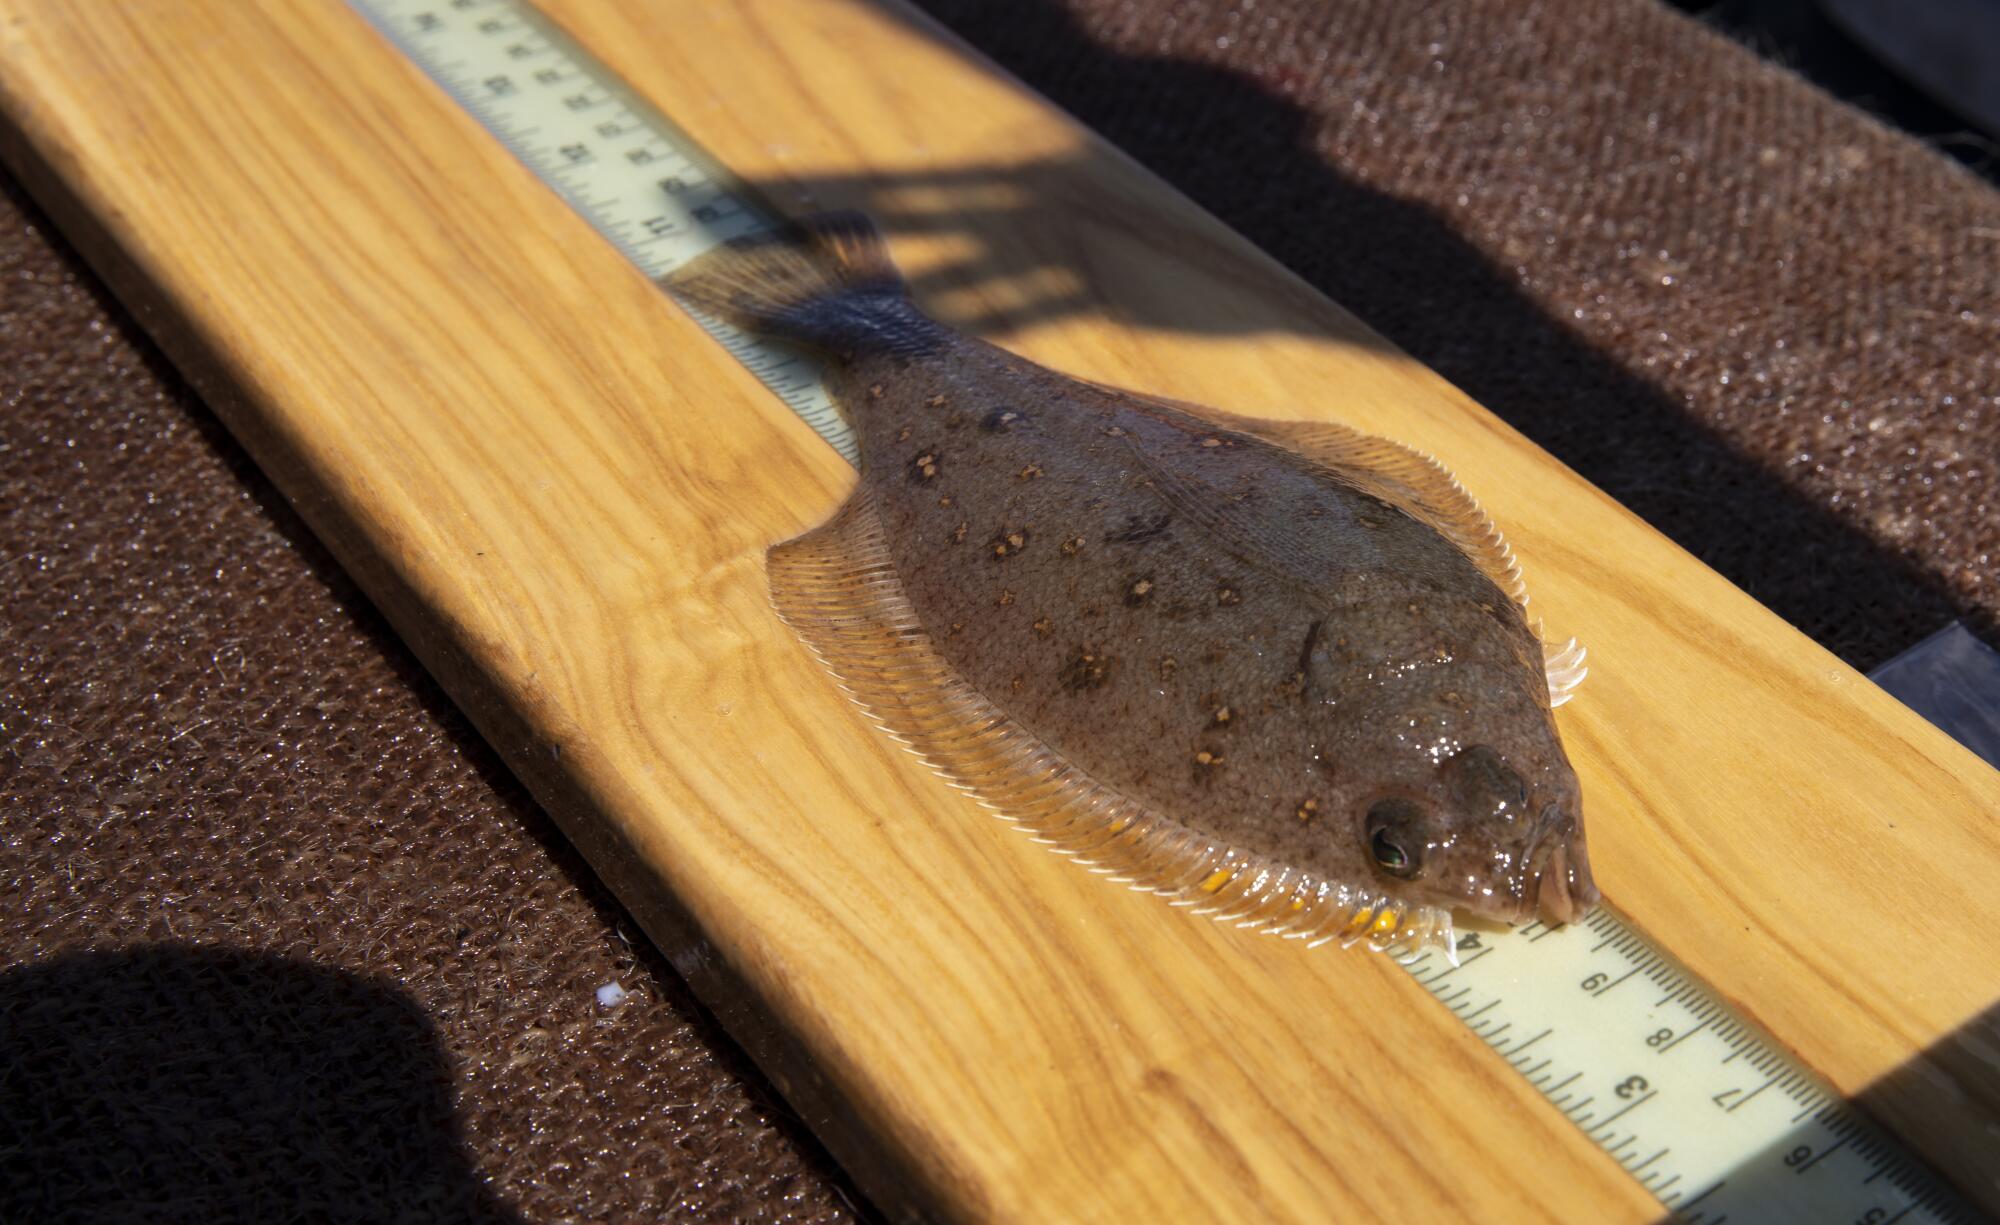 A longfin sanddab is measured during a trip with the California Collaborative Fisheries Research Program